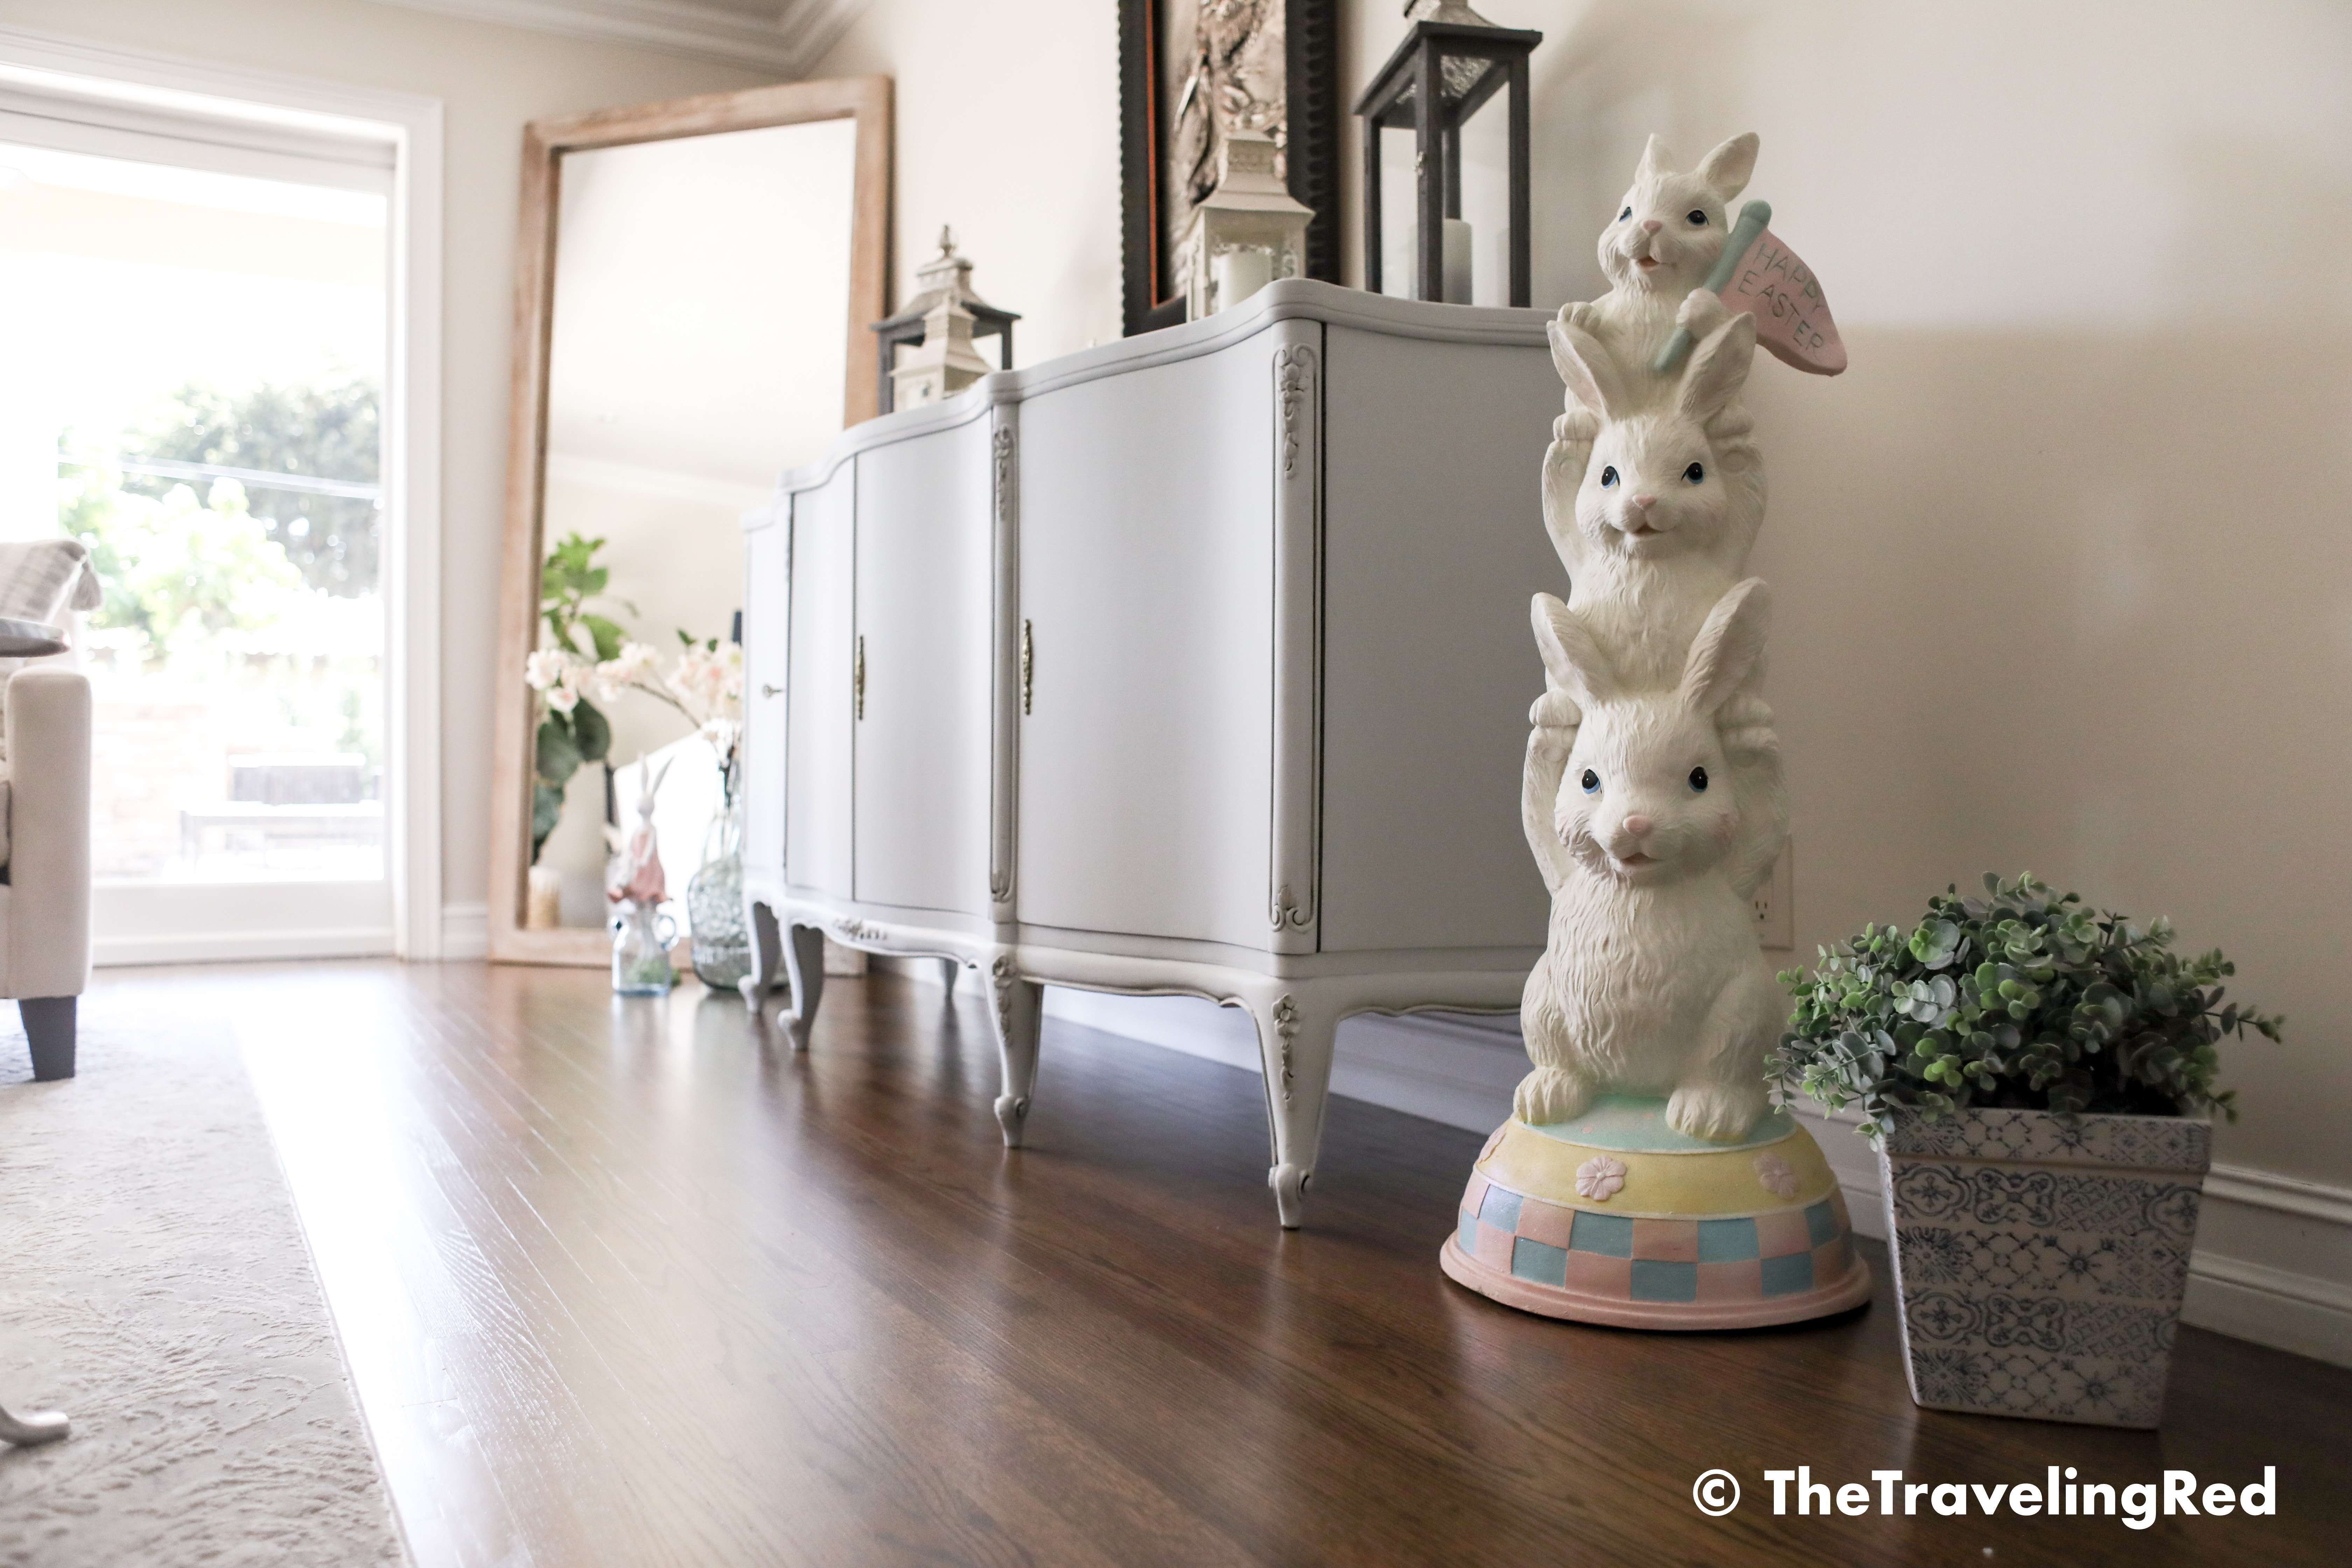 Easter home decor details in my living room and family room. Seasonal decorations perfect for spring and easter. Pillows, bunnies, candles and decor to fill the space in my modern farmhouse.